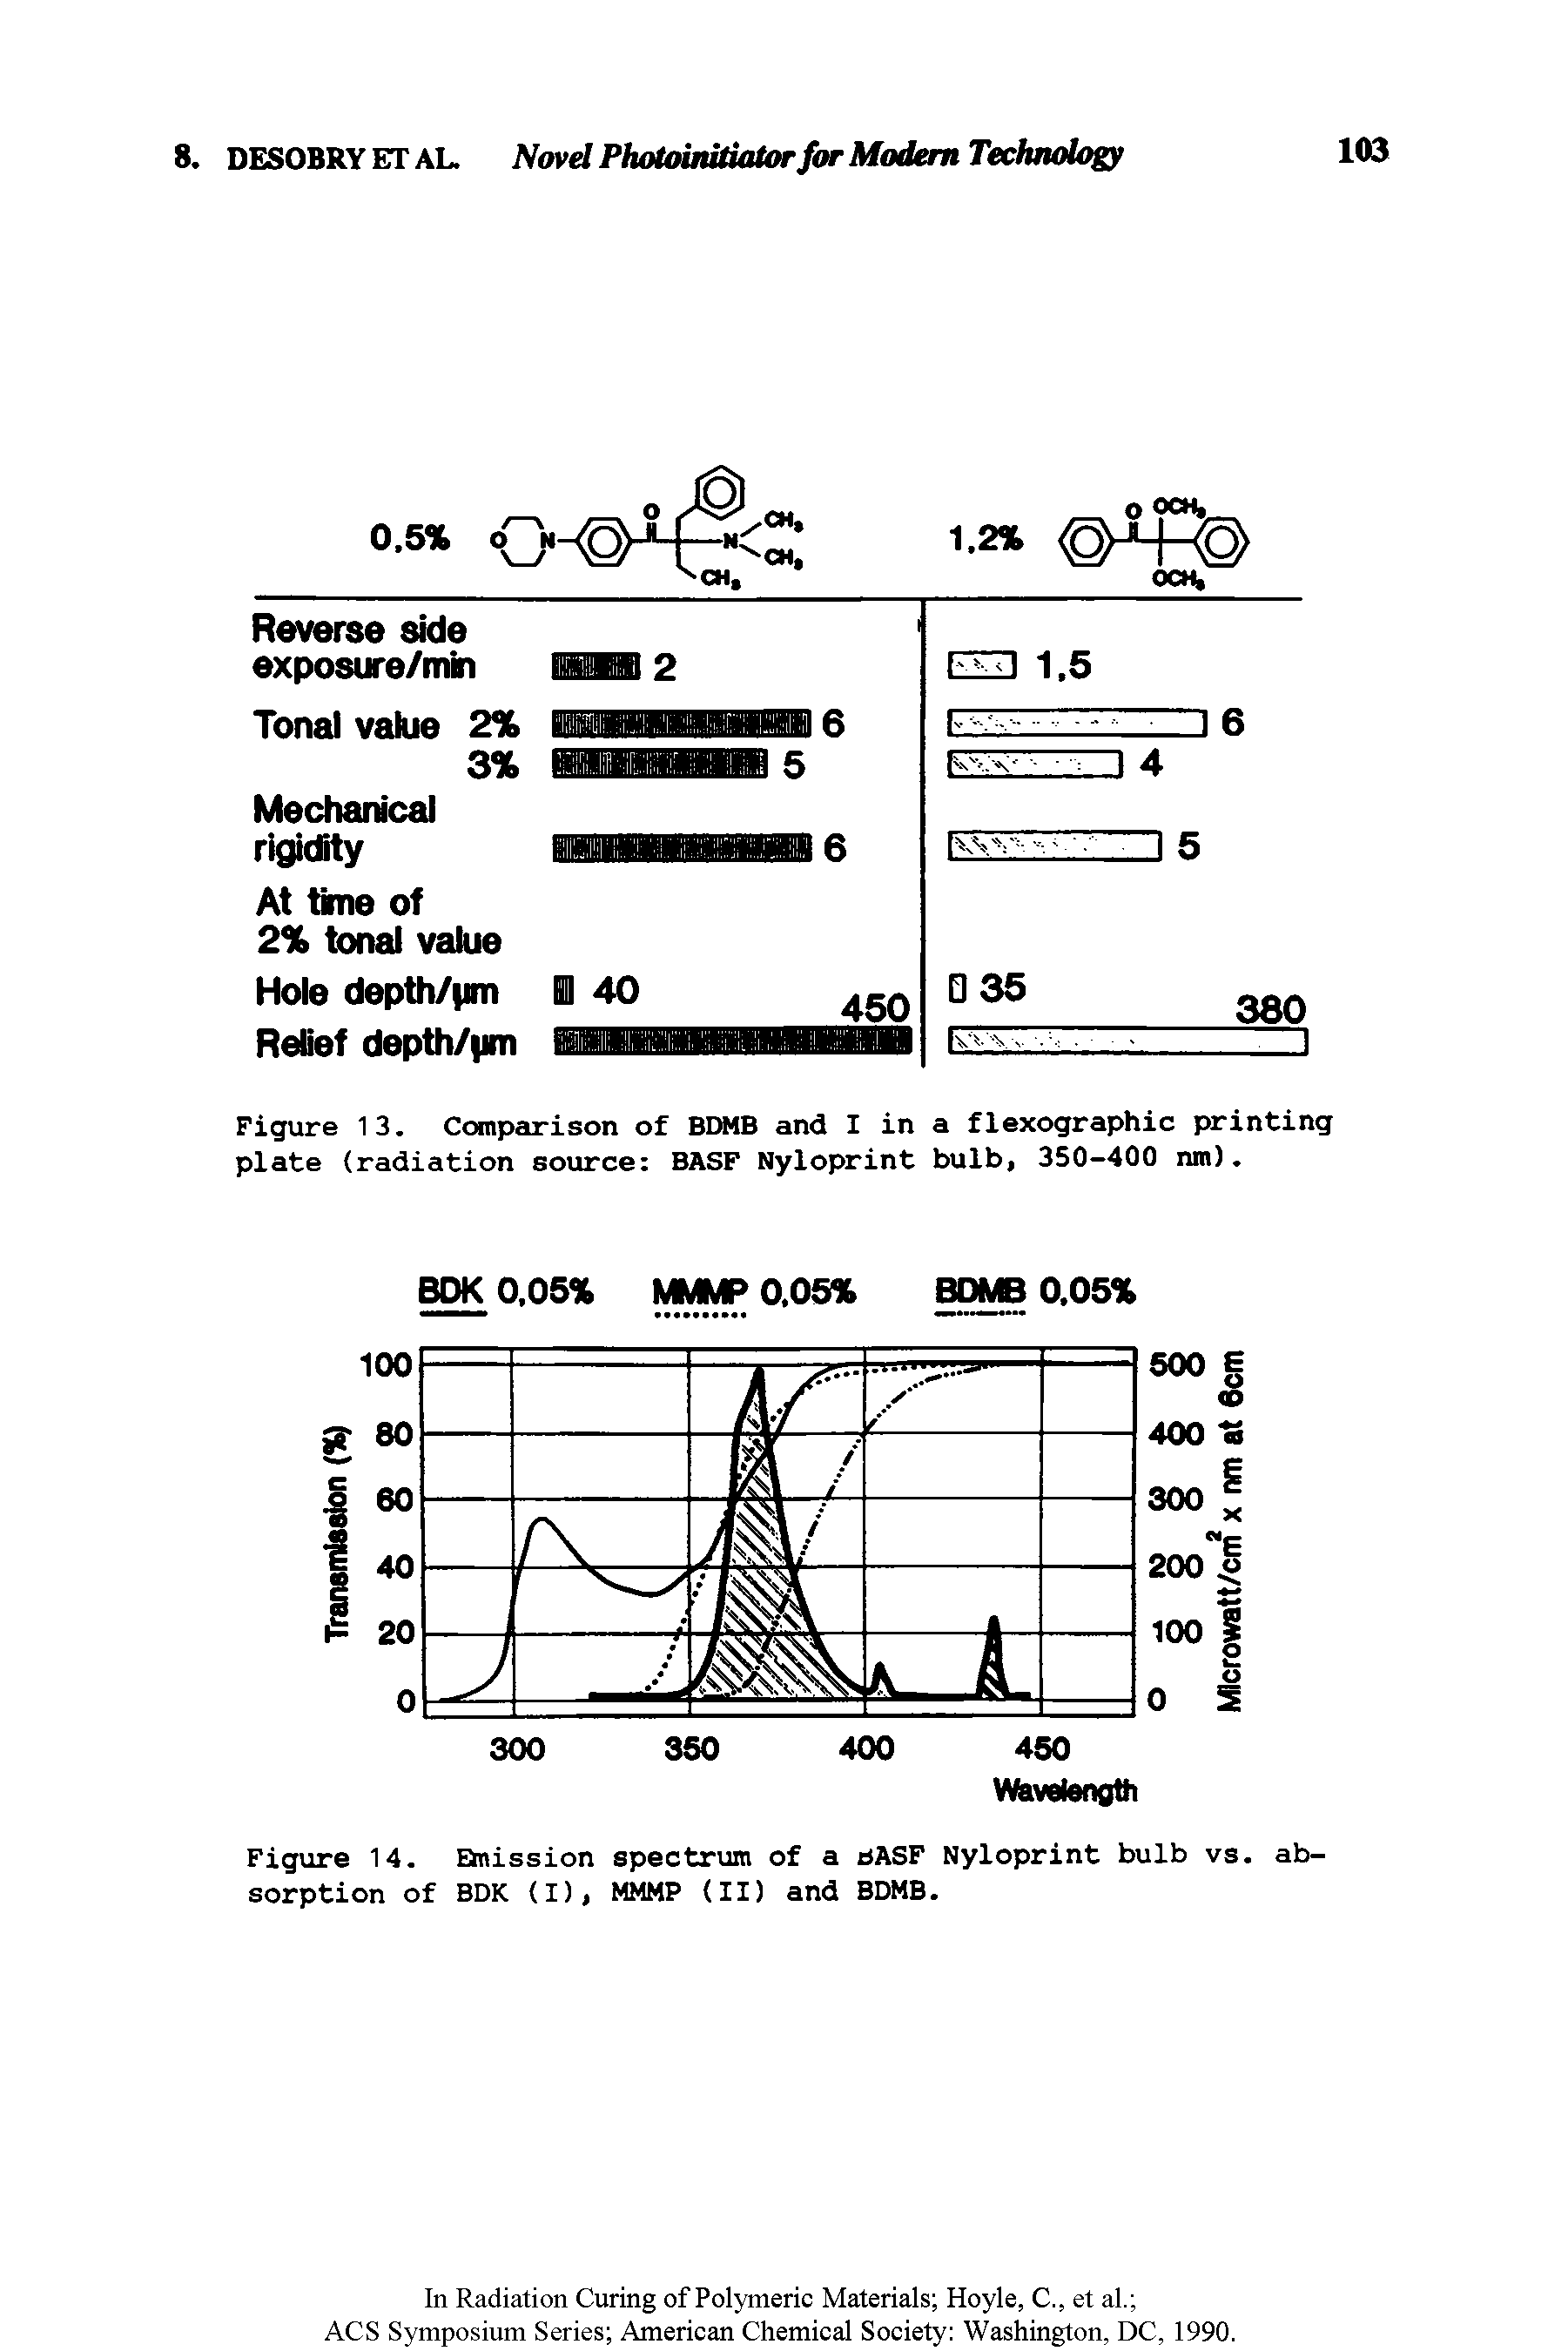 Figure 13. Comparison of BOMB and I in a flexographic printing plate (radiation source BASF Nyloprint bulb, 350-400 nm).